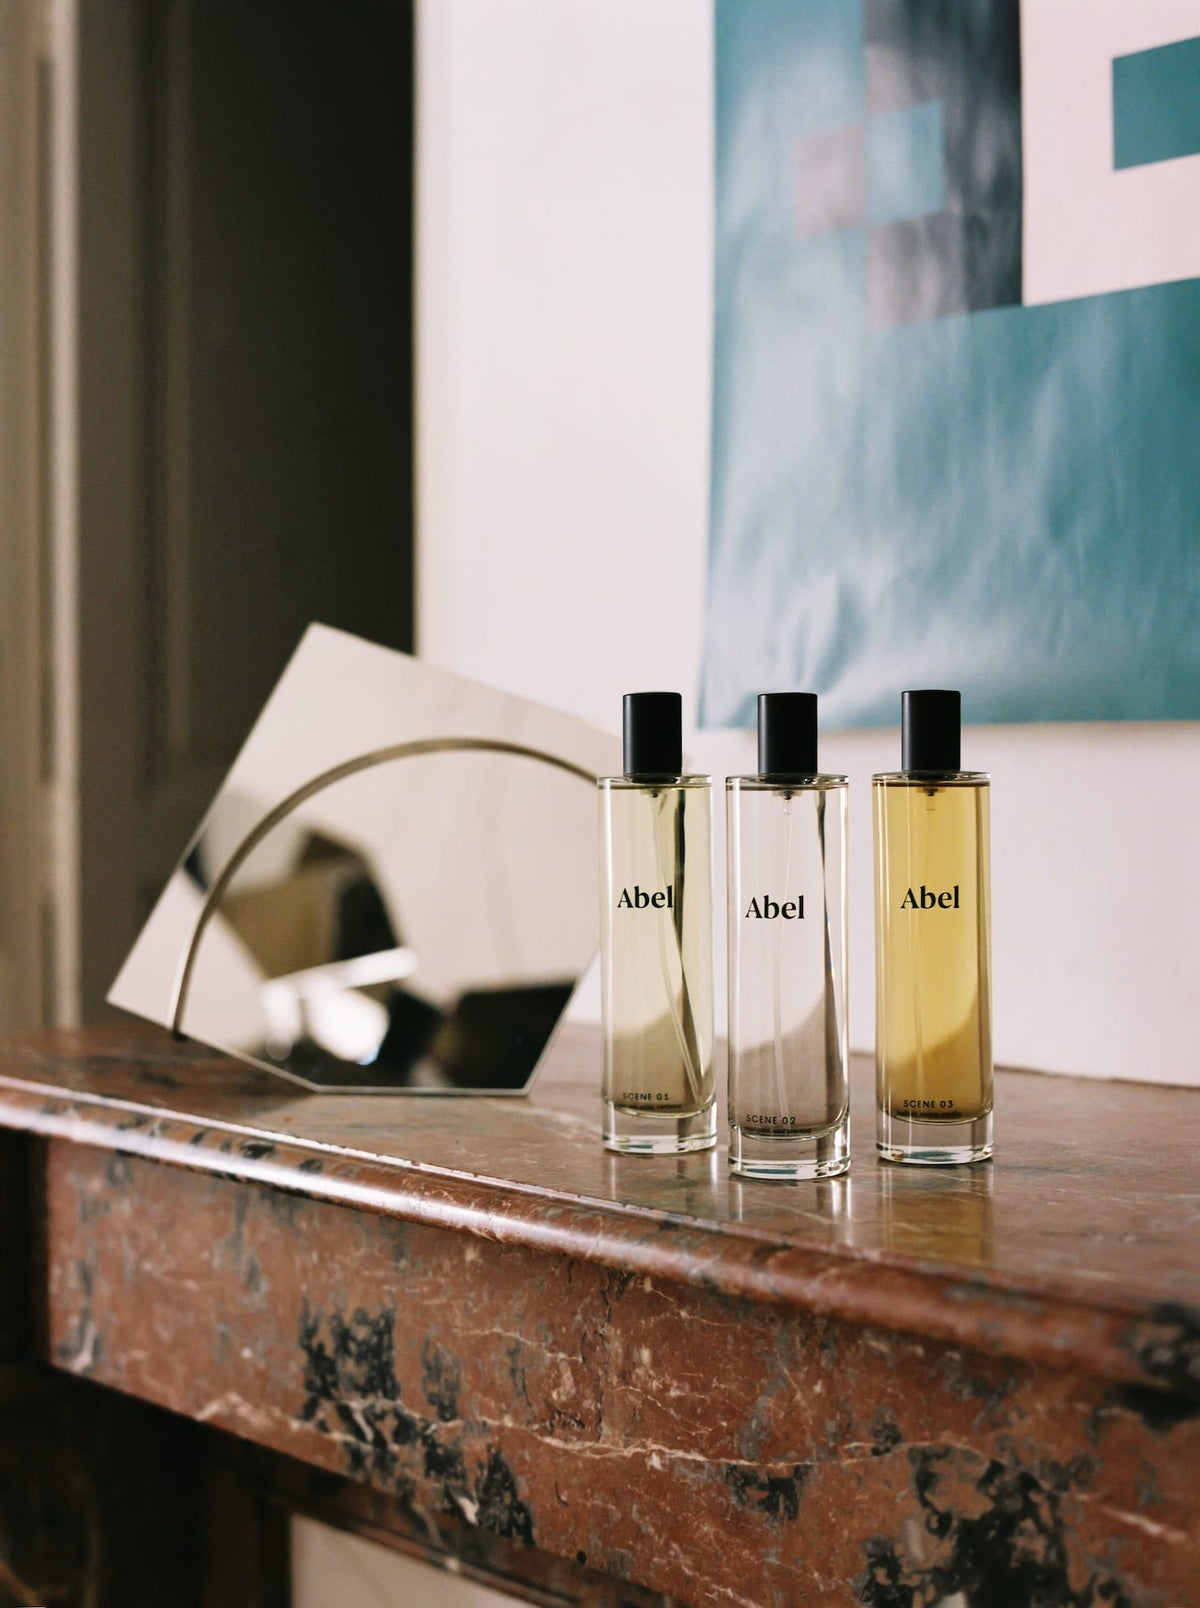 Three bottles of Abel Room Spray – Scene 01 ⋅ green tea, yuzu, verbena on a wooden surface with a circular mirror in the background.